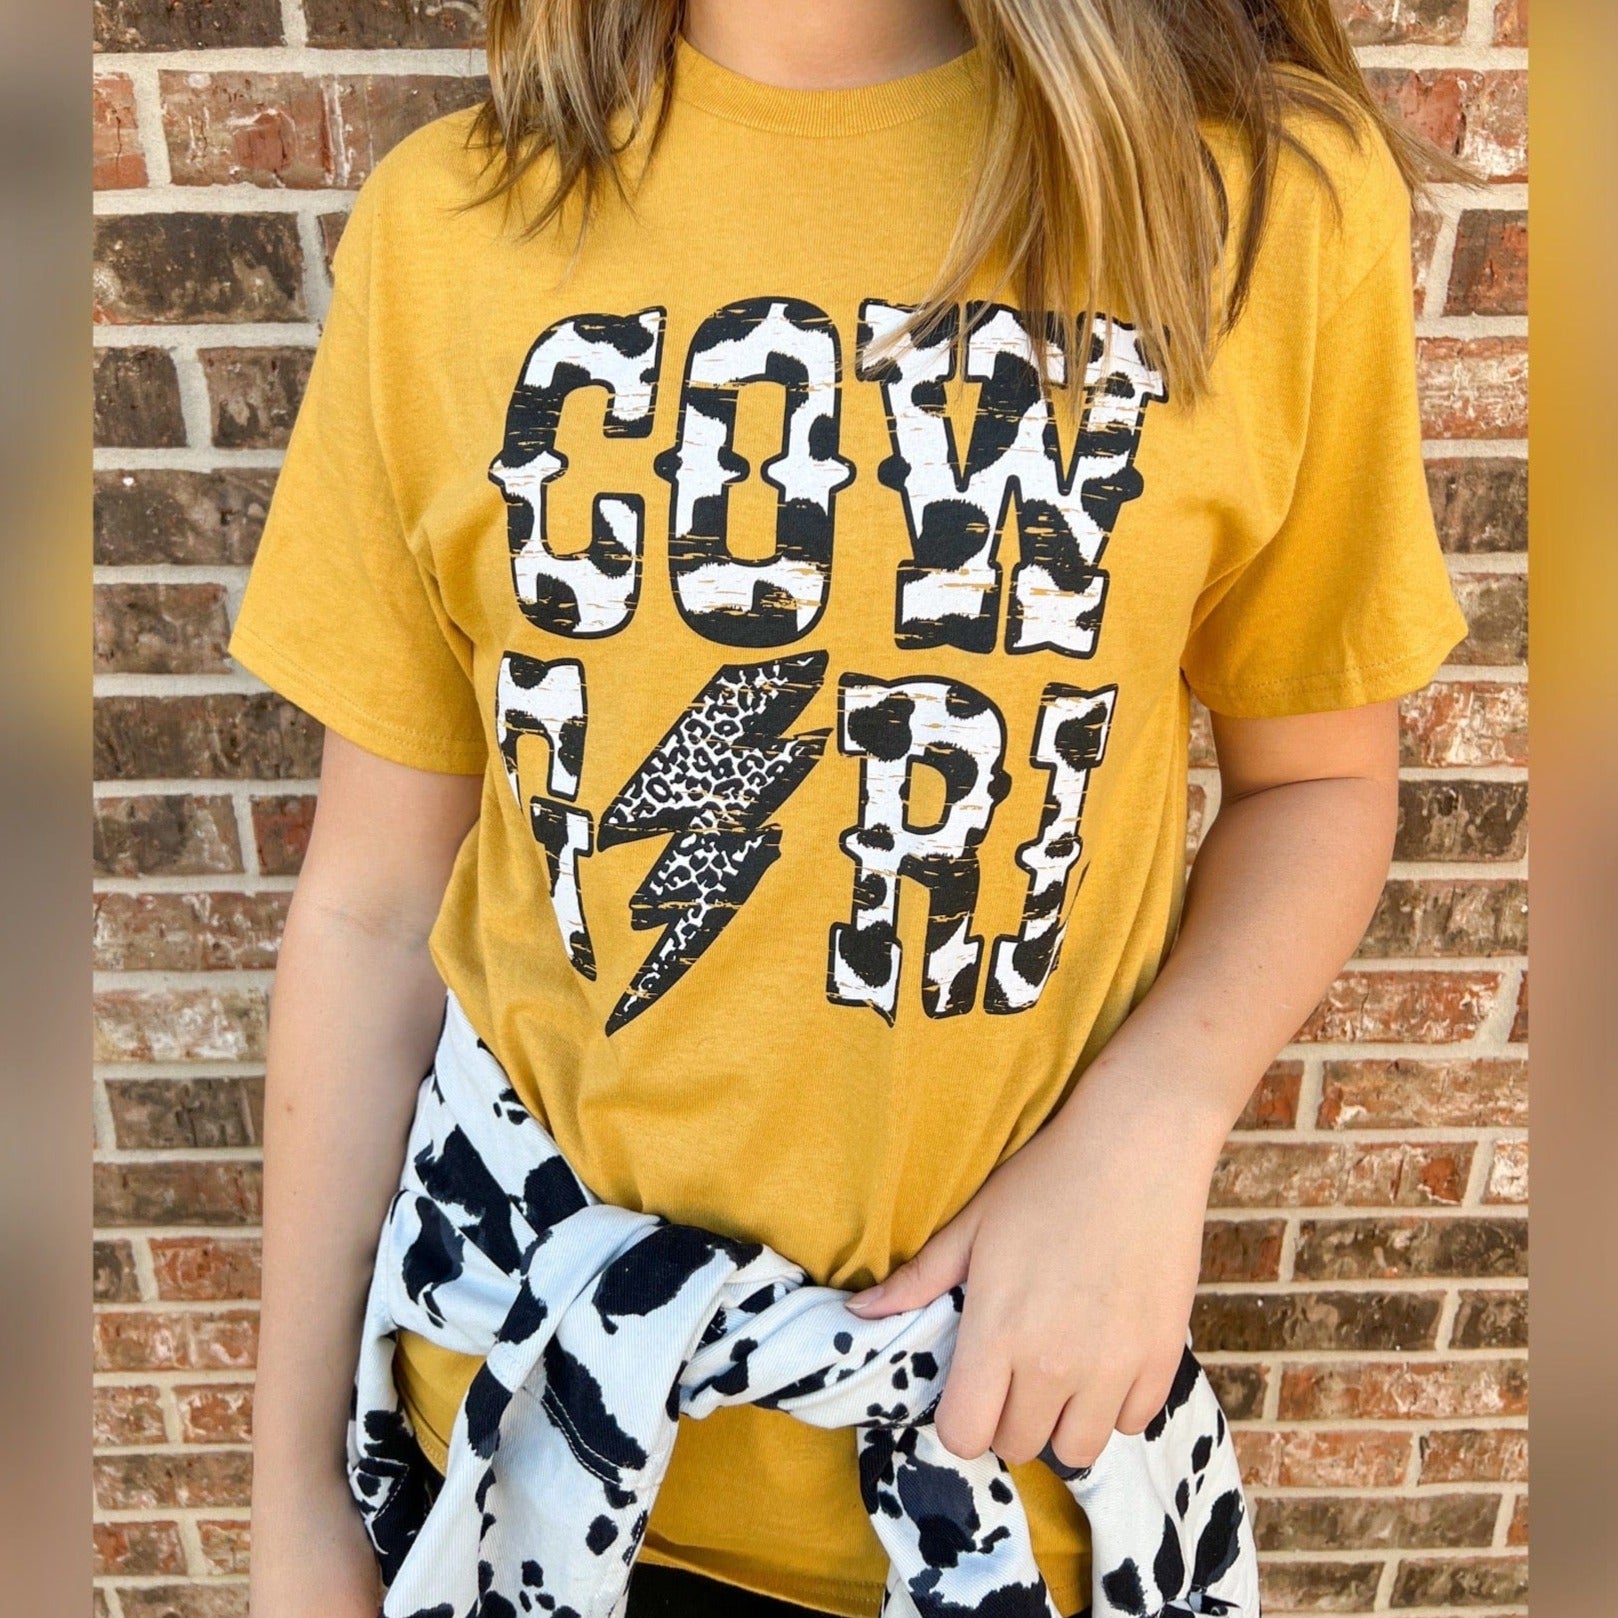 Envy Stylz Boutique Women - Apparel - Shirts - T-Shirts Cowgirl Cow Print Leopard Graphic Tee